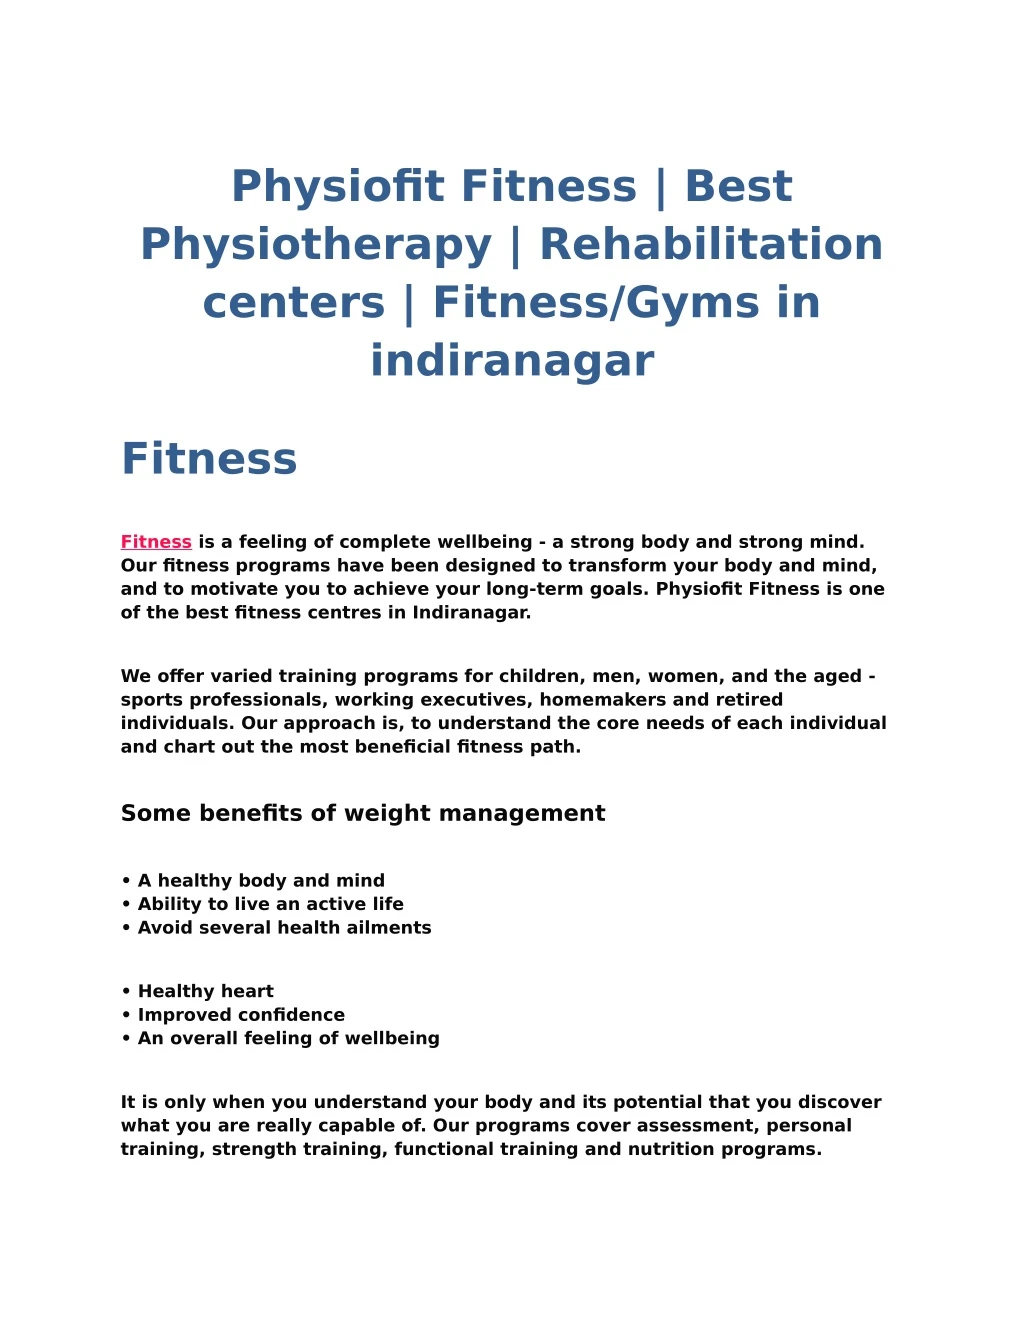 physiofit fitness best physiotherapy